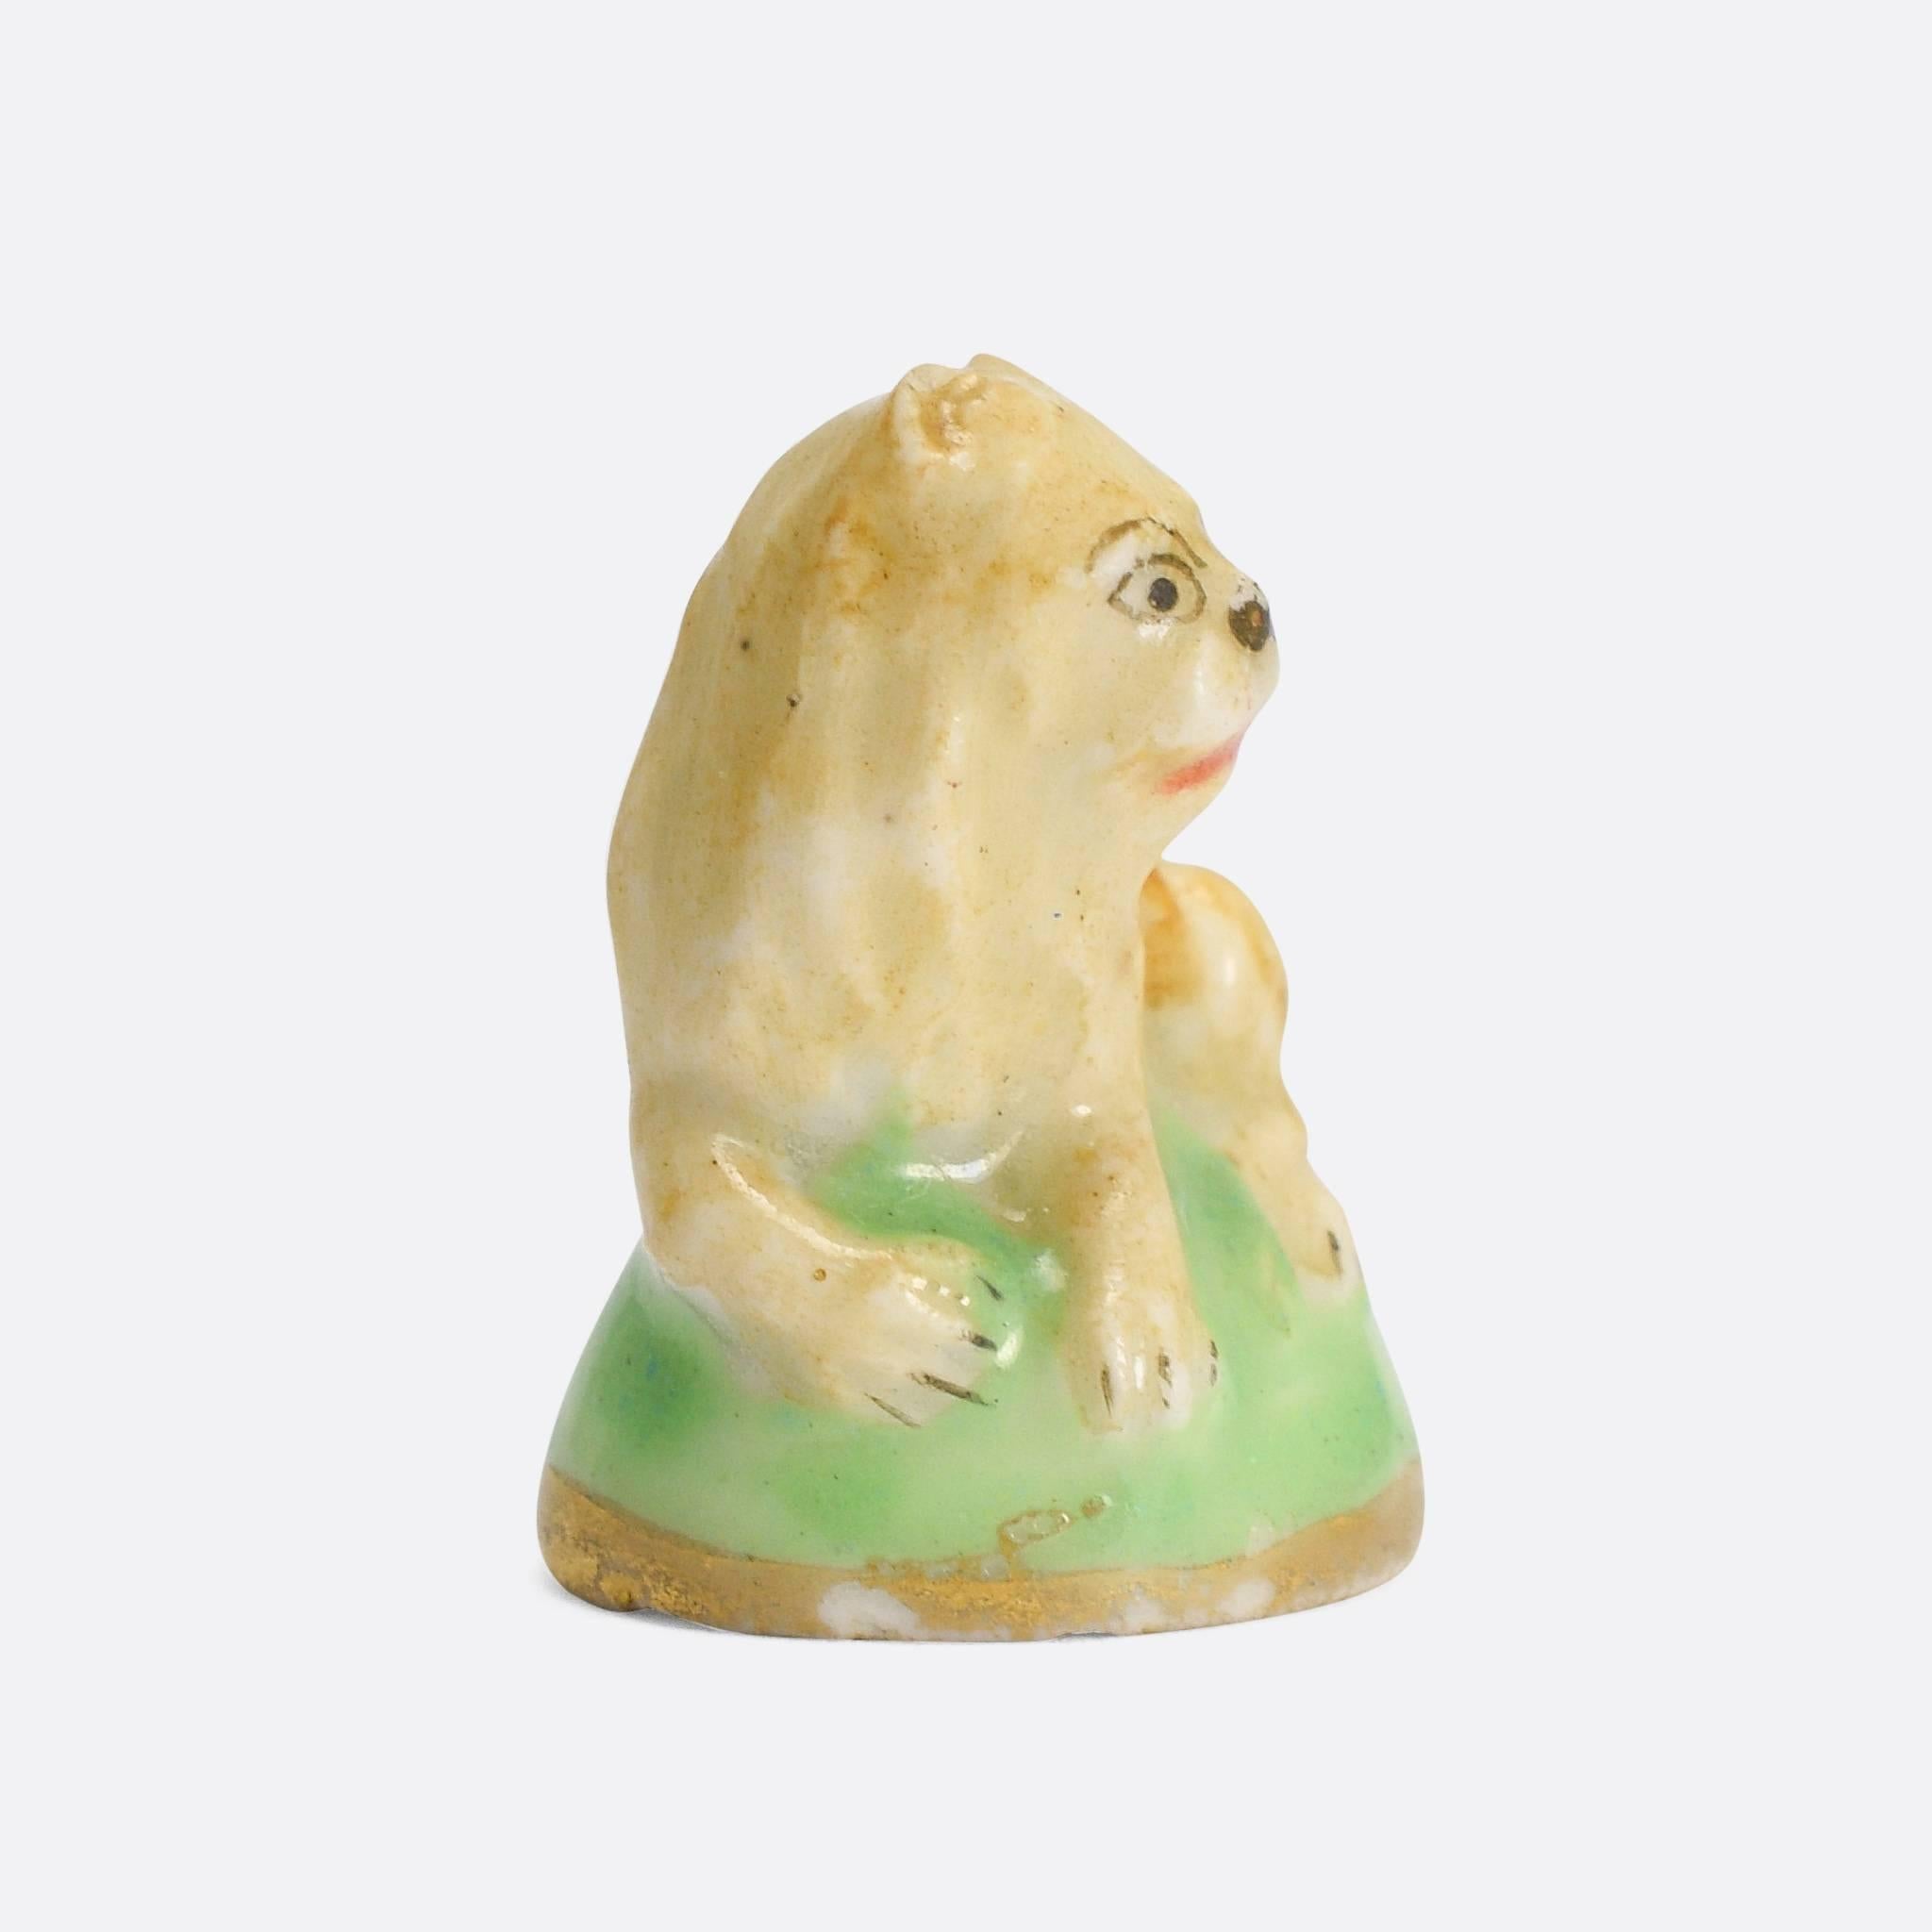 An original 18th Century porcelain Derby Chelsea period fob seal. This particular piece features a lion, and displays the pale colouring typical of the Chelsea factory.

These seals would have been given as love tokens by the rich and famous of the